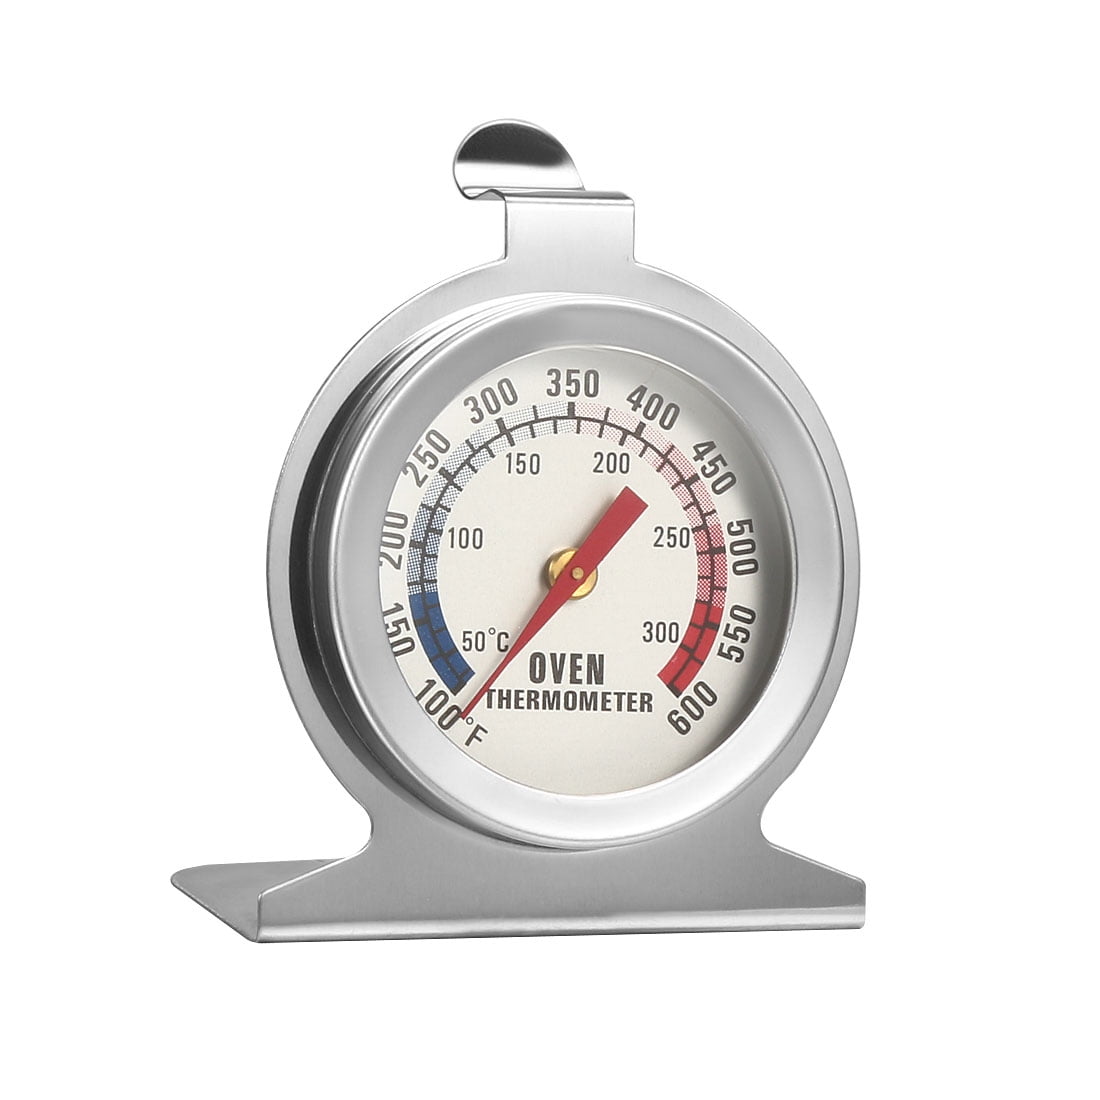 Uxcell Oven Thermometer 100-600F Stainless Steel Instant Read Temperature Gauge, Silver